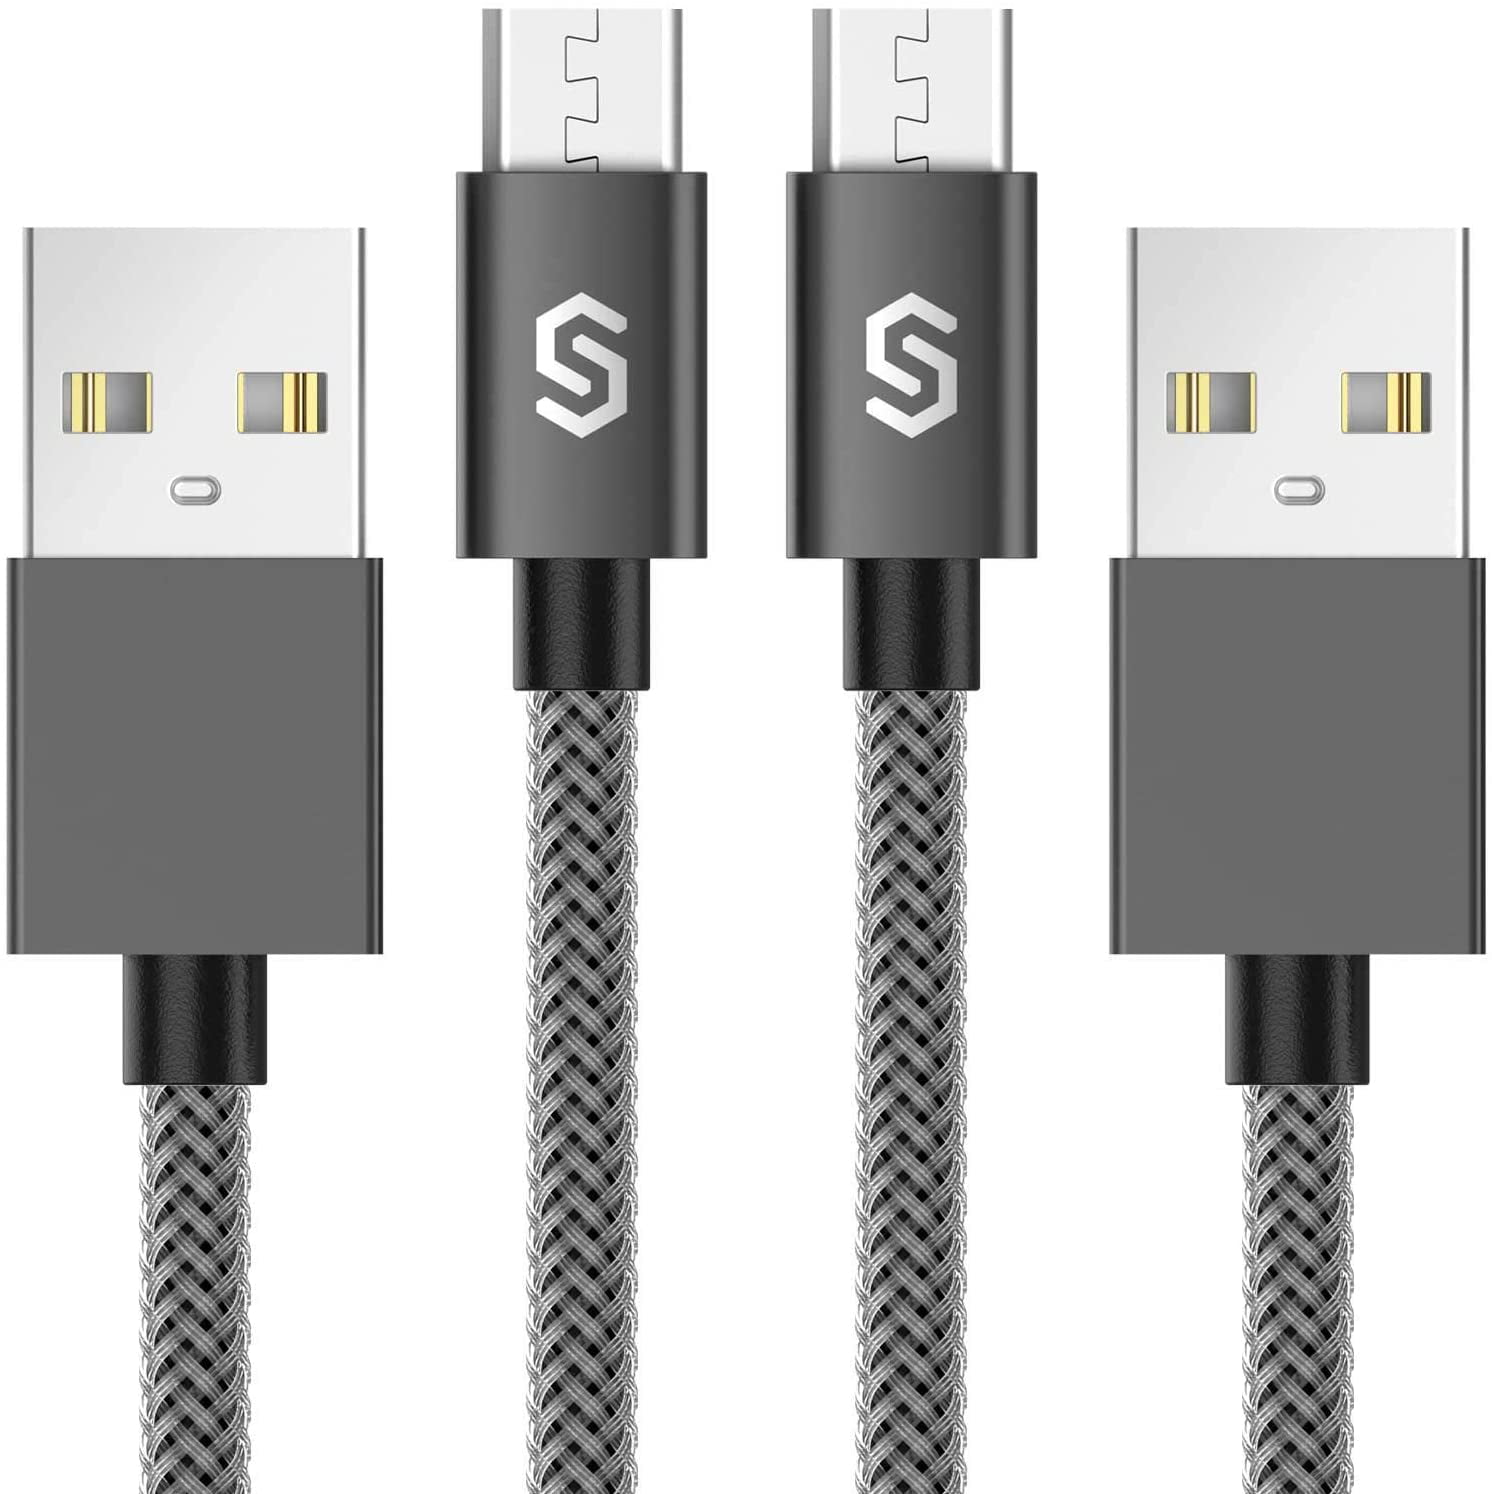 Right Angle Micro USB Cable 3M 90 Degree Android Charger Cable 3 Pack Alloy Braided Data Transfer Cords and Rapid Charger Compatible with Samsung Galaxy S7 and More Android Phones 3M, Grey 